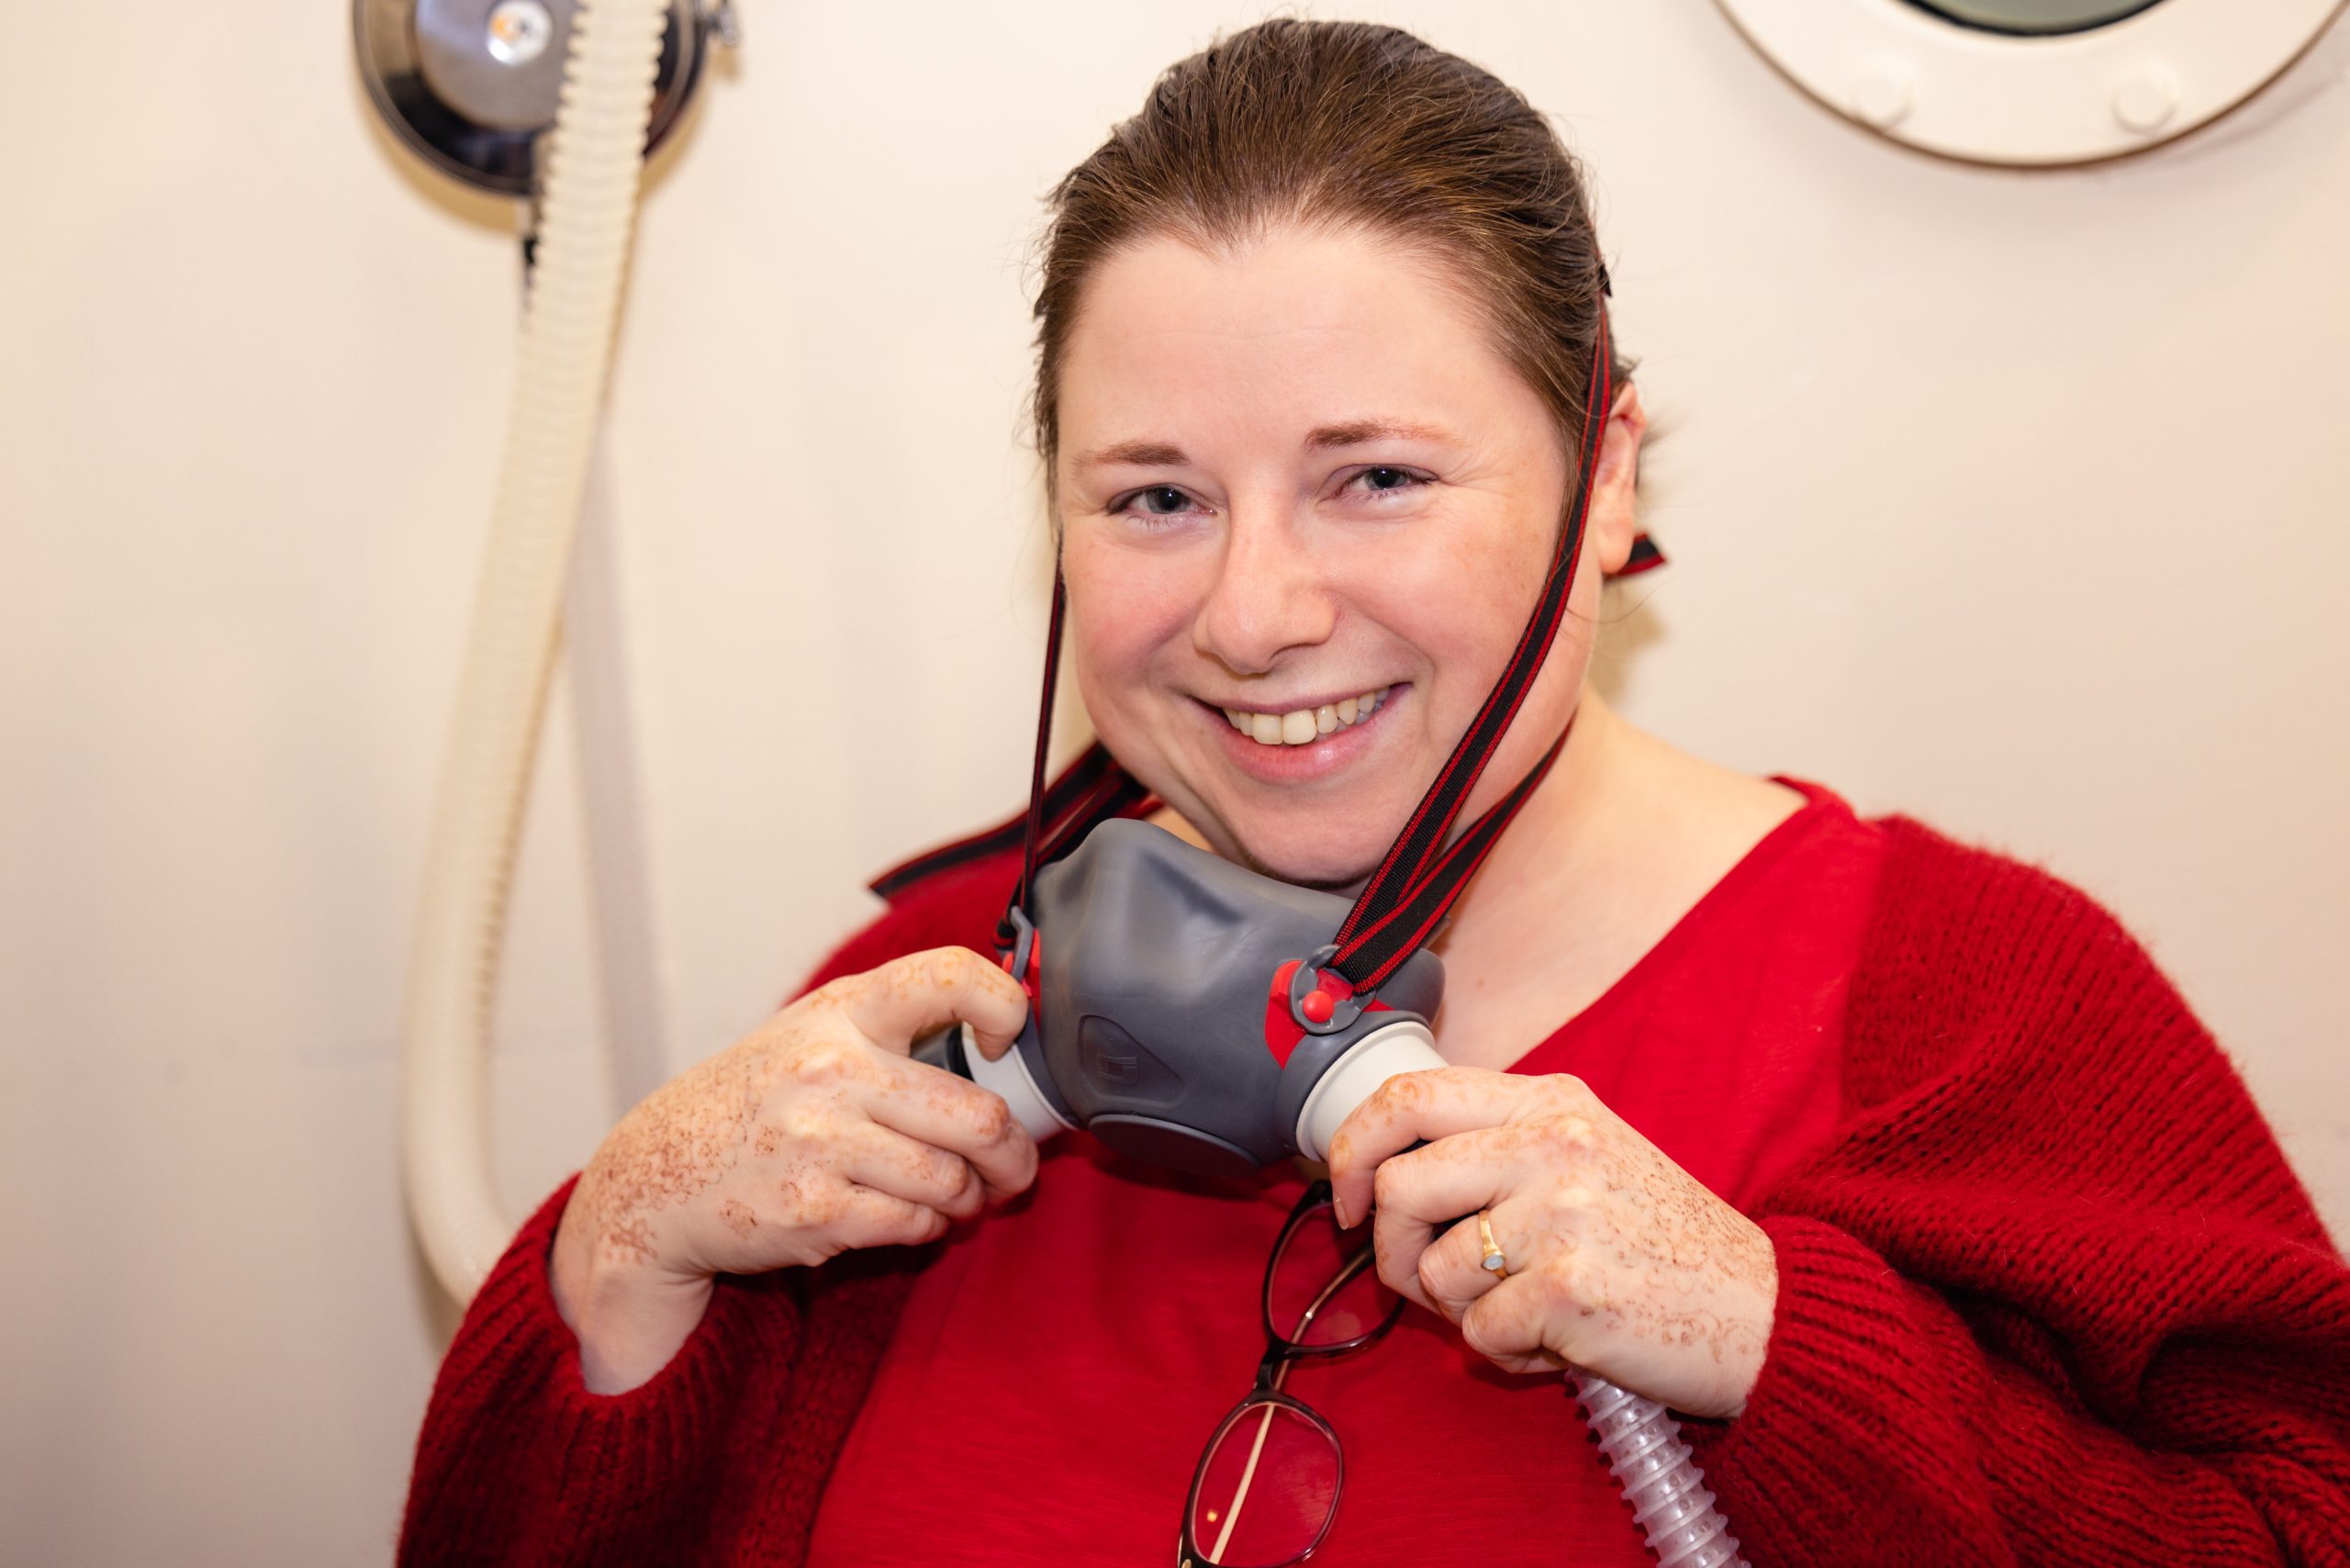 Smiling woman putting on oxygen mask